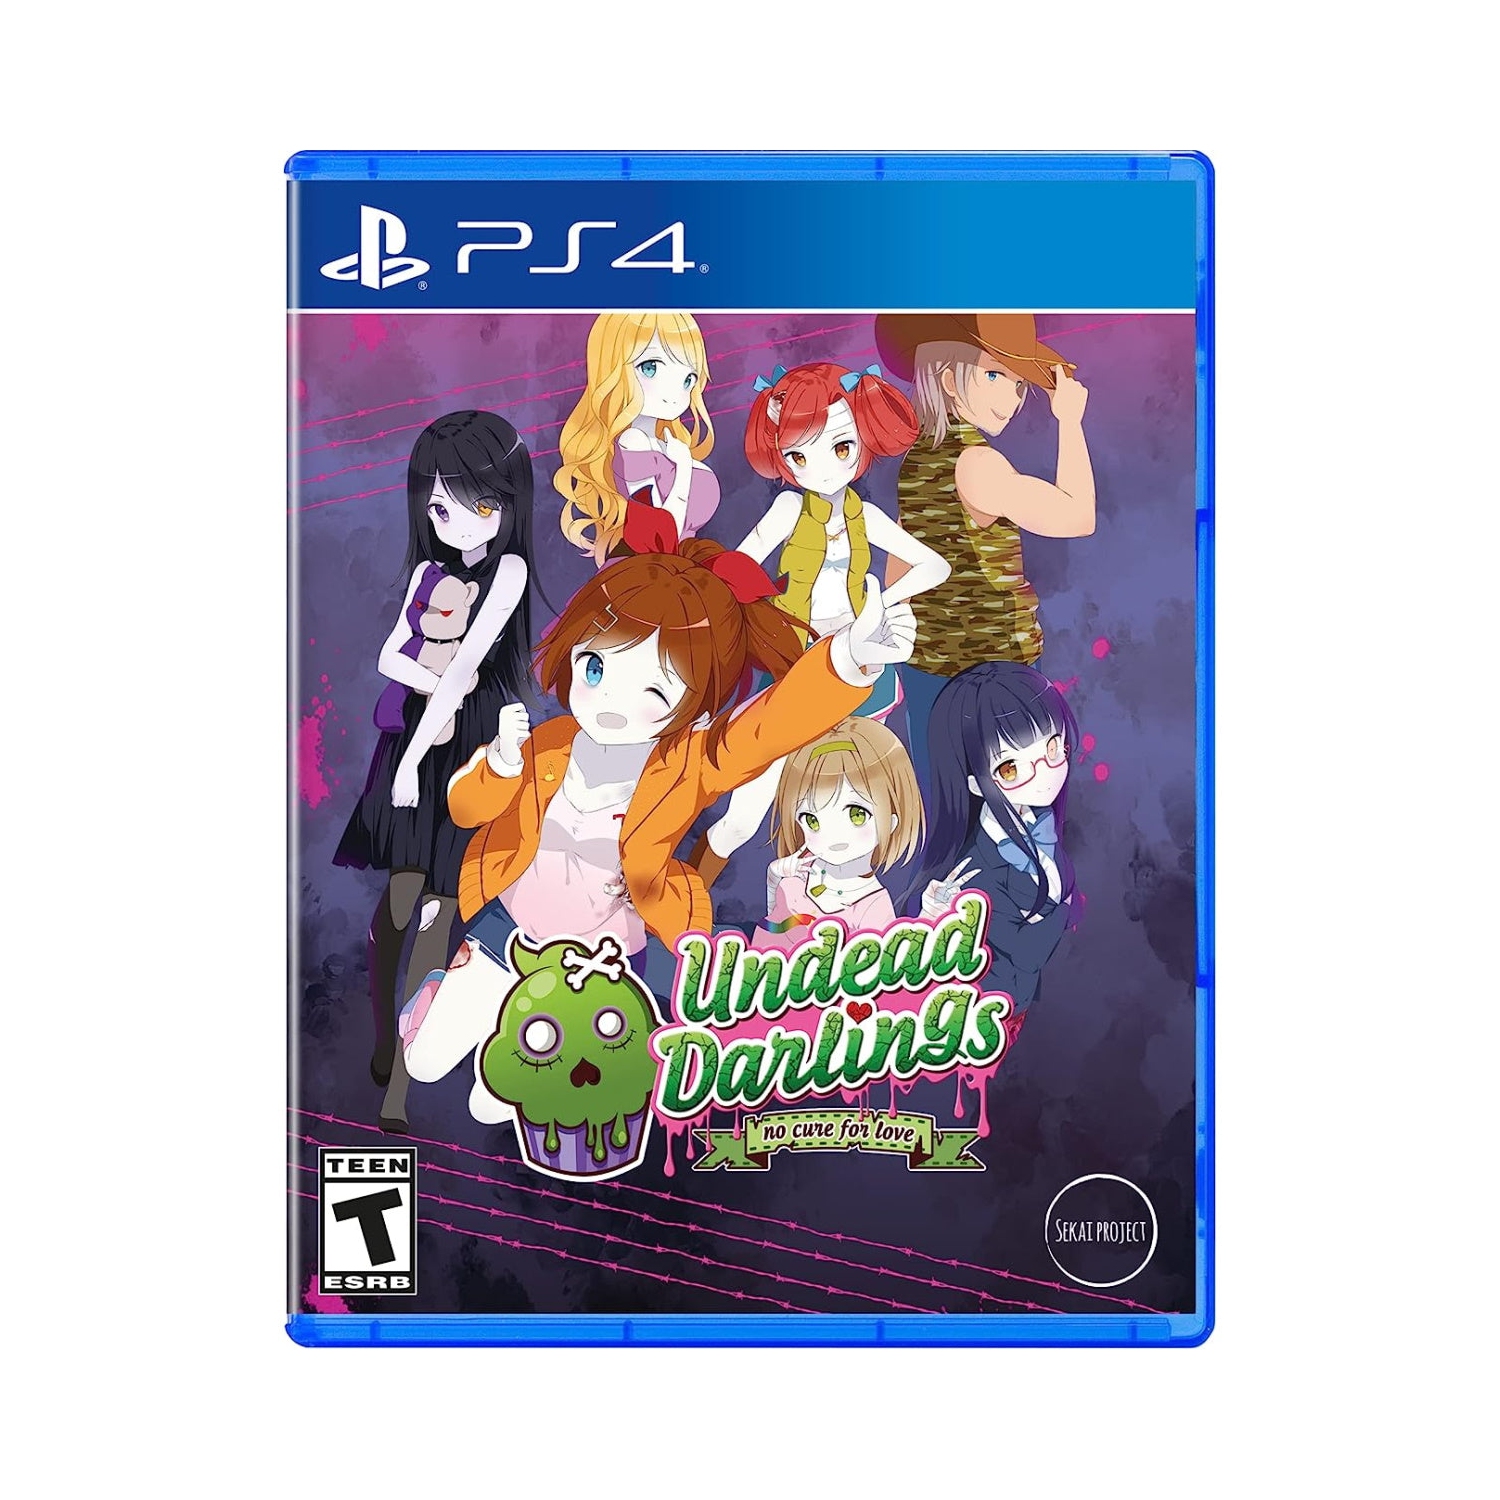 Undead Darlings ~no cure for love~ [PlayStation 4]